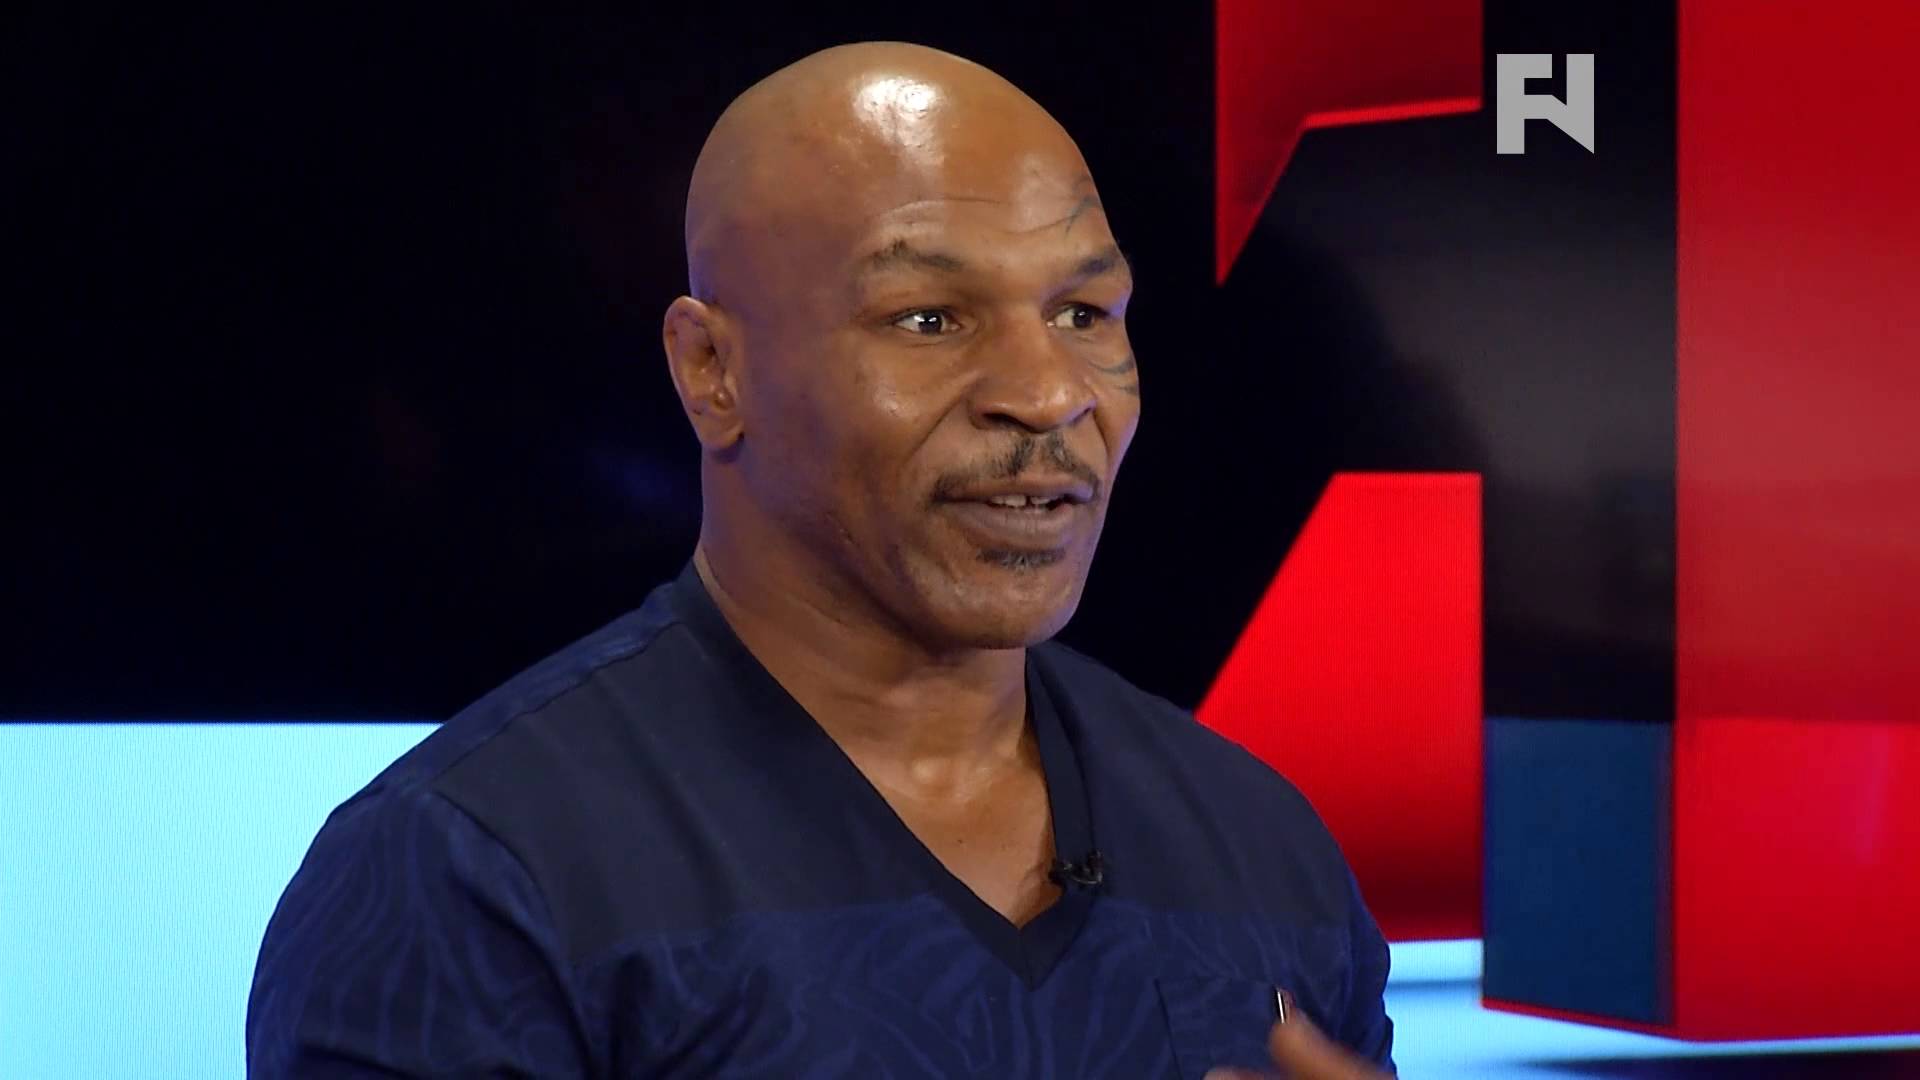 Video - The Fight Network Interview 'Iron' Mike Tyson1920 x 1080